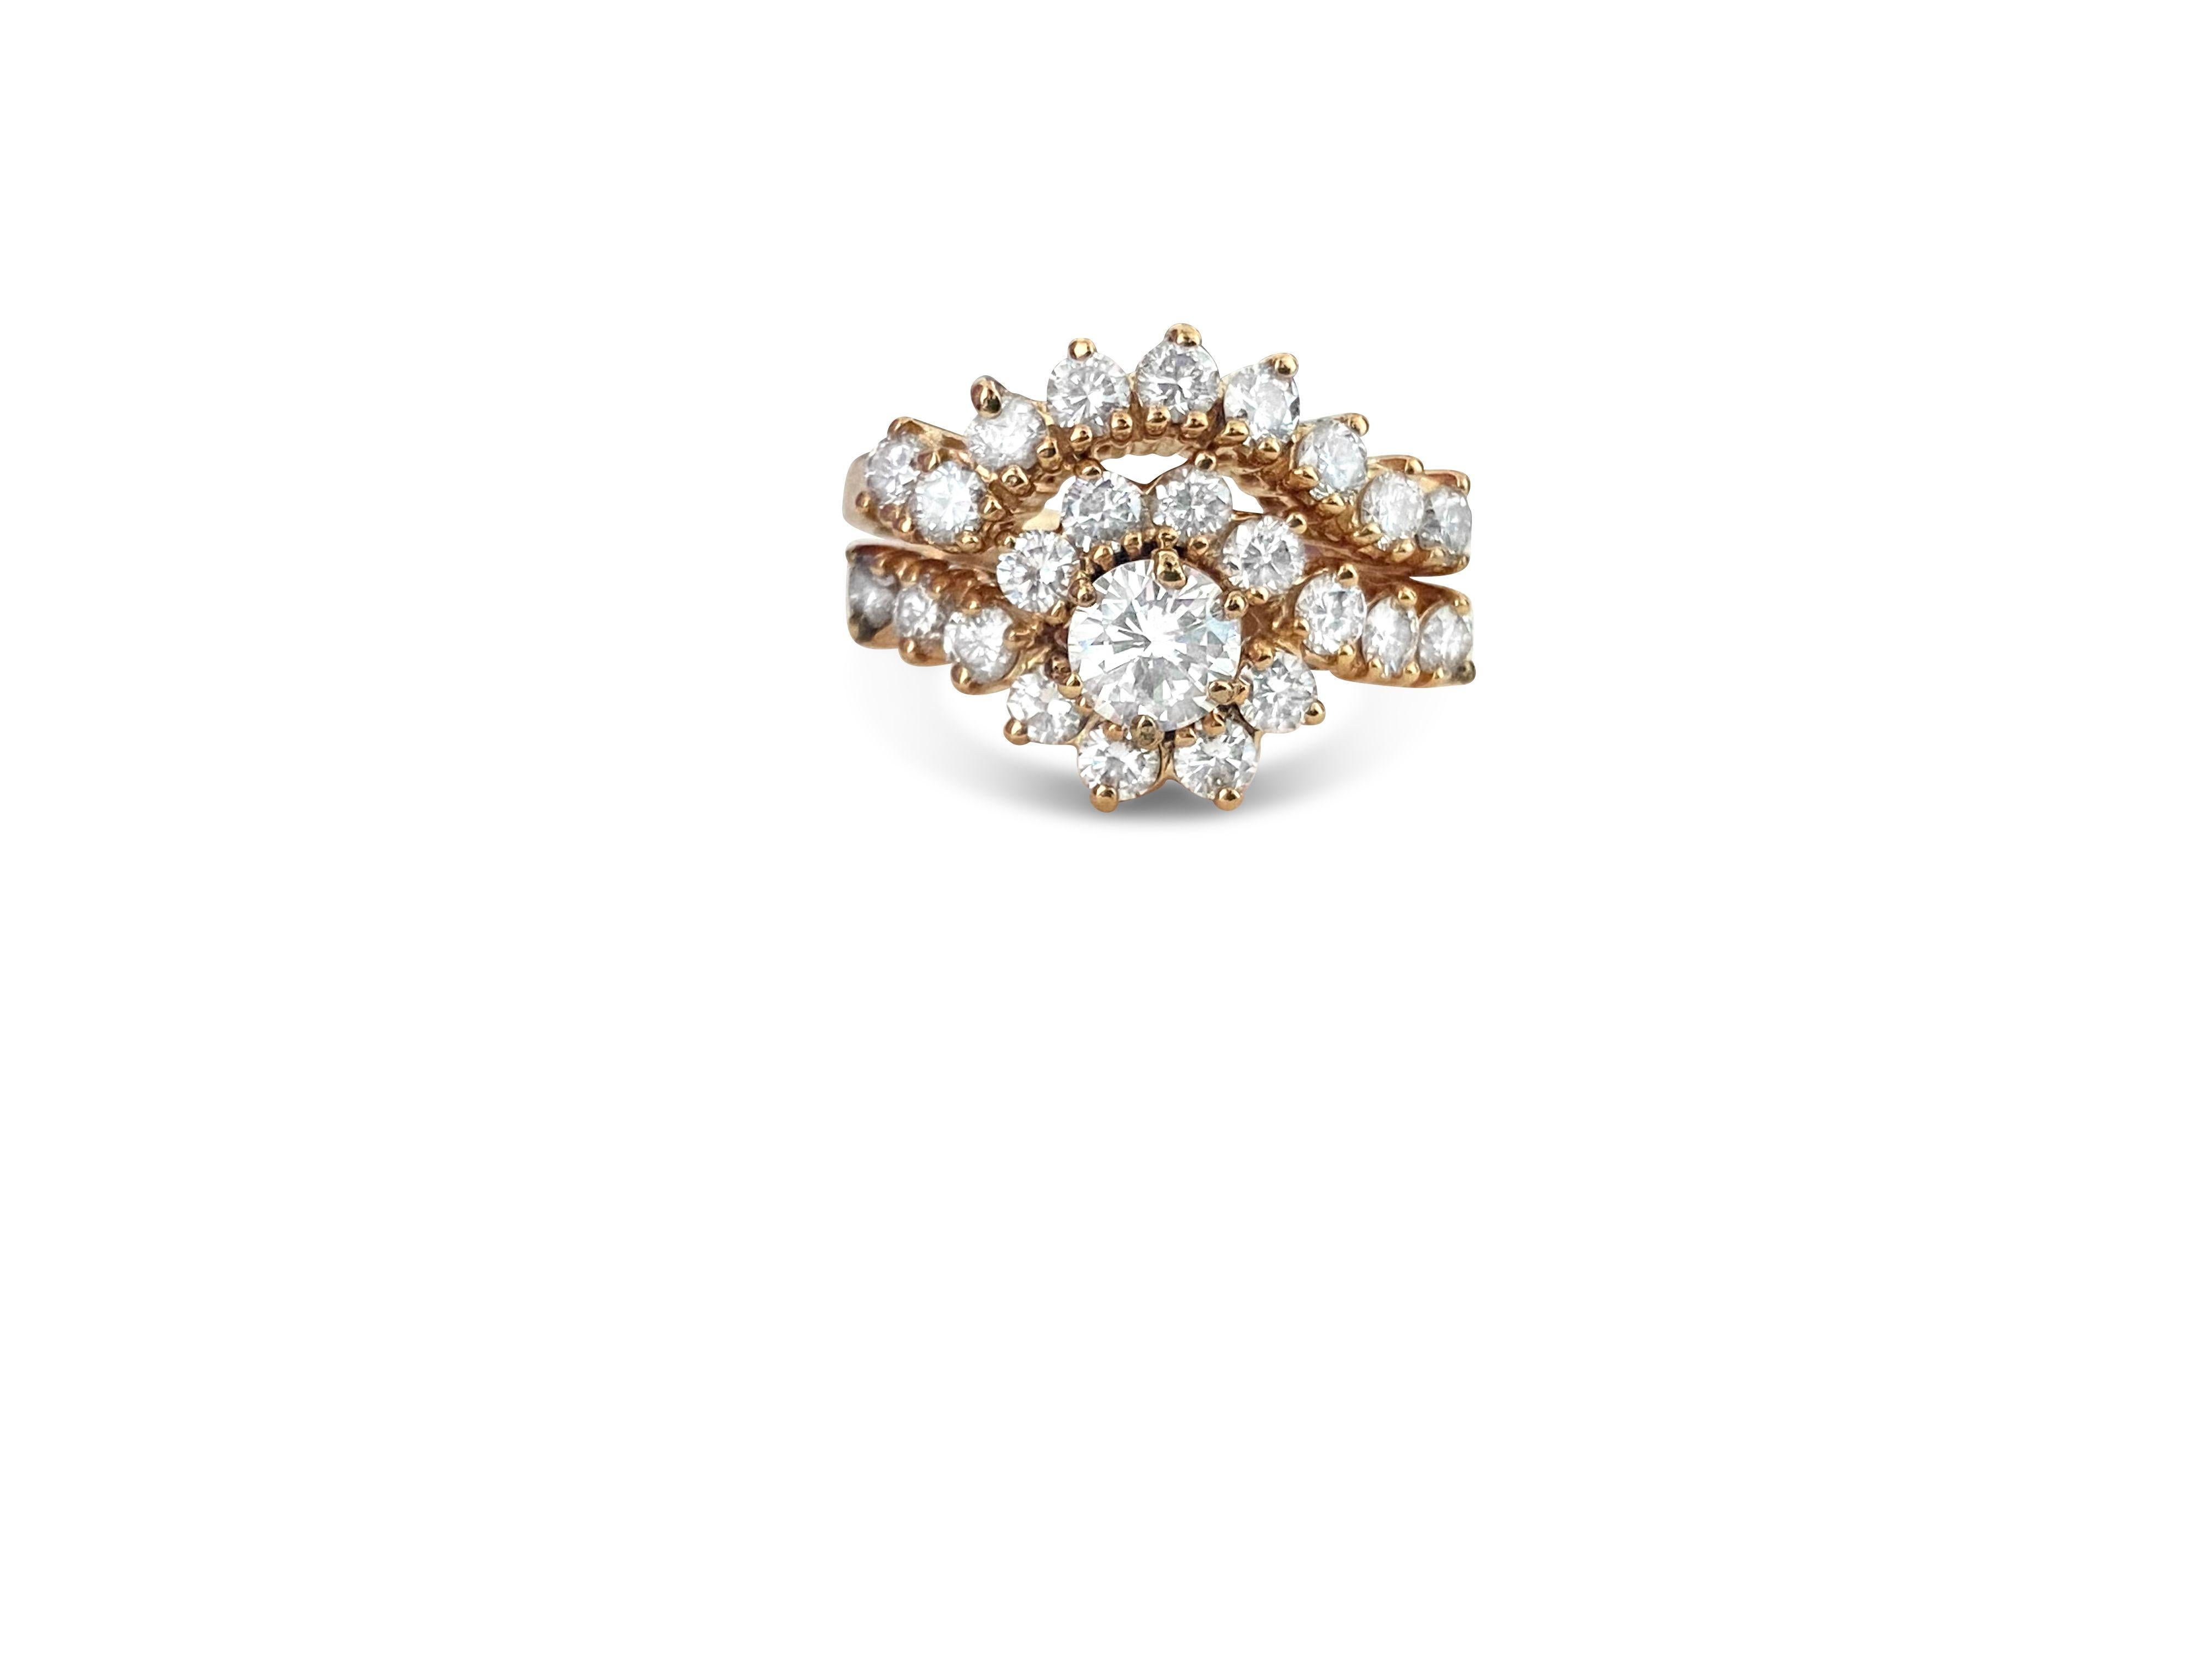 Made in luxurious 14K yellow gold, this captivating ring boasts a centerpiece diamond weighing 0.70 carats with G color and SI2 clarity, accentuated by side diamonds totaling 1.30 carats featuring G color and VS-SI clarity, with a total diamond